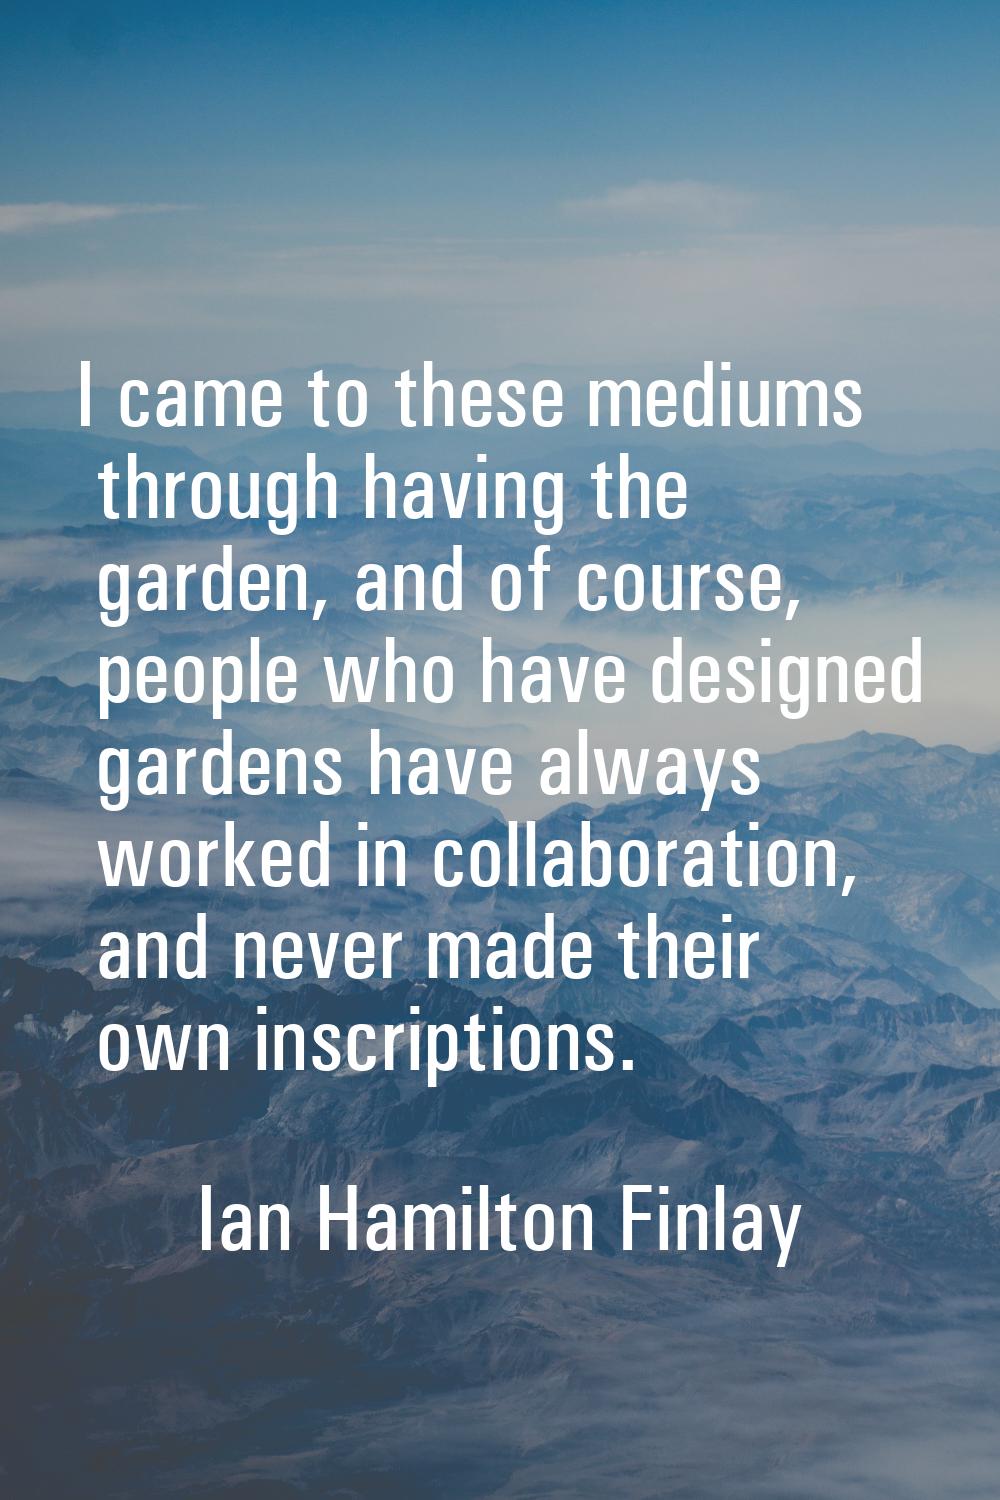 I came to these mediums through having the garden, and of course, people who have designed gardens 